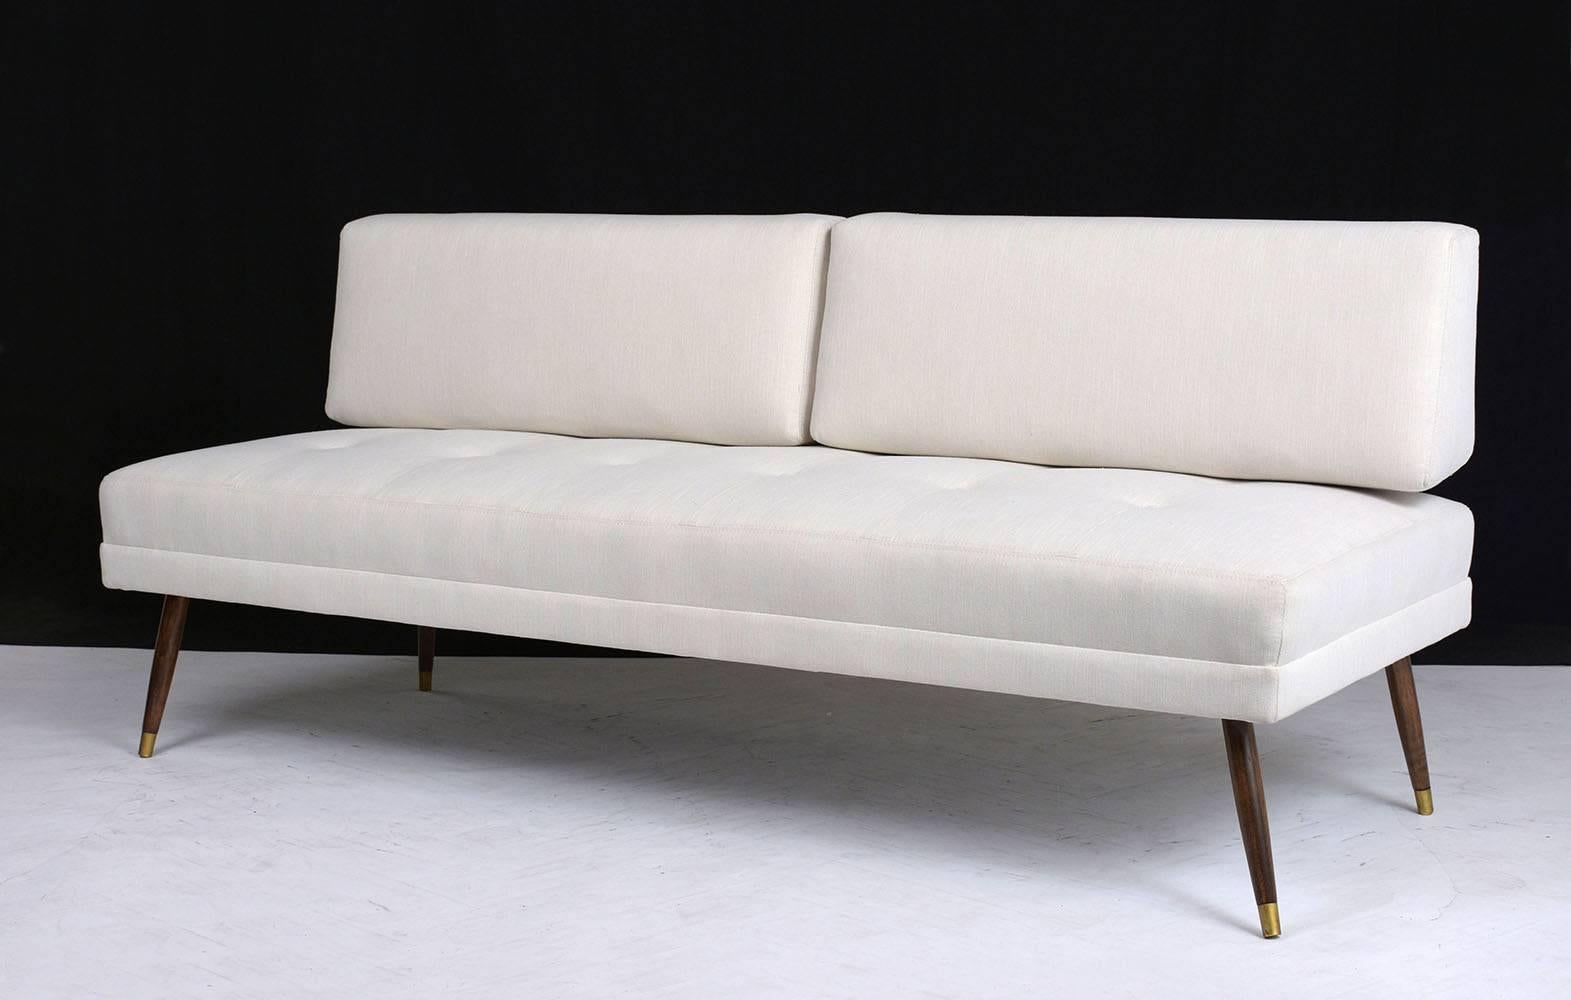 This 1960s Mid-Century Modern sofa has been completely restored with comfortable new cushions and upholstery. The sofa is professionally upholstered in an ivory color fabric with double stitching details. The seat cushion is attached with tufted